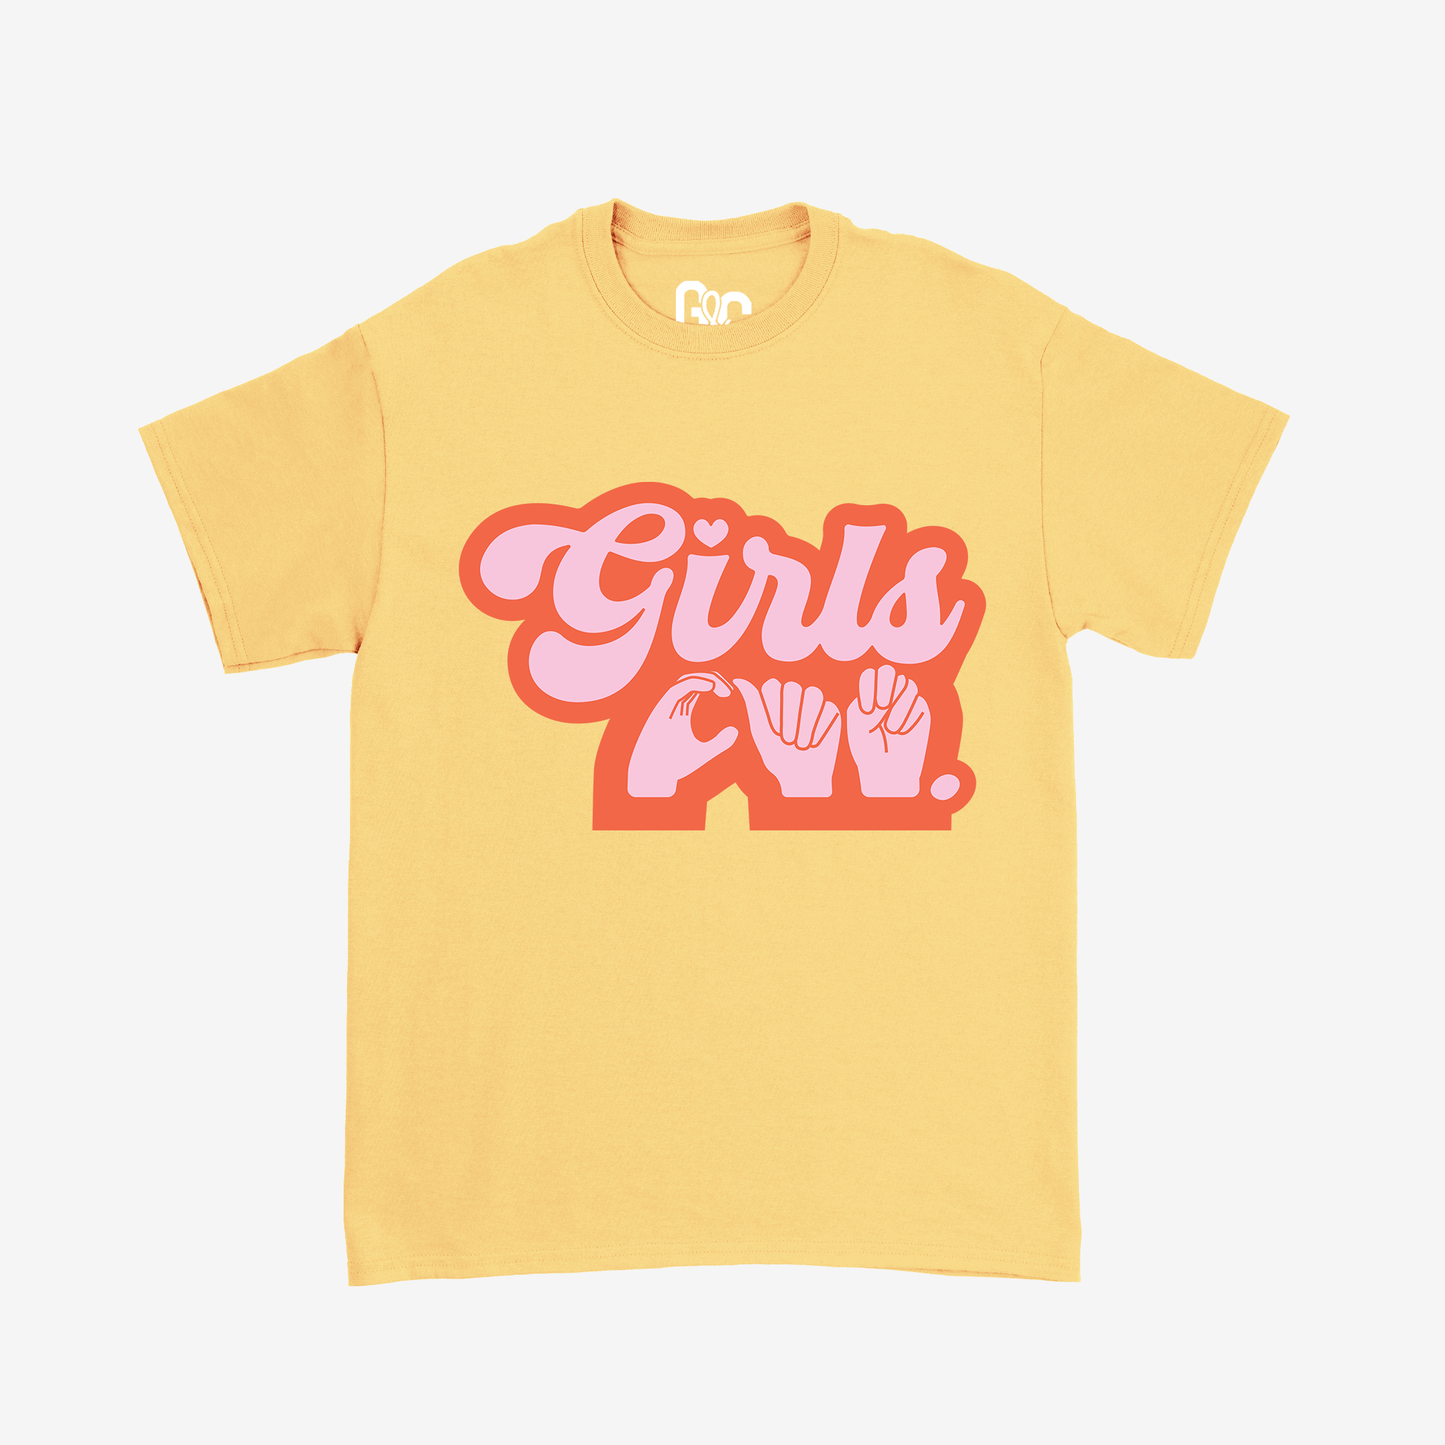 Girls Can Youth Tee